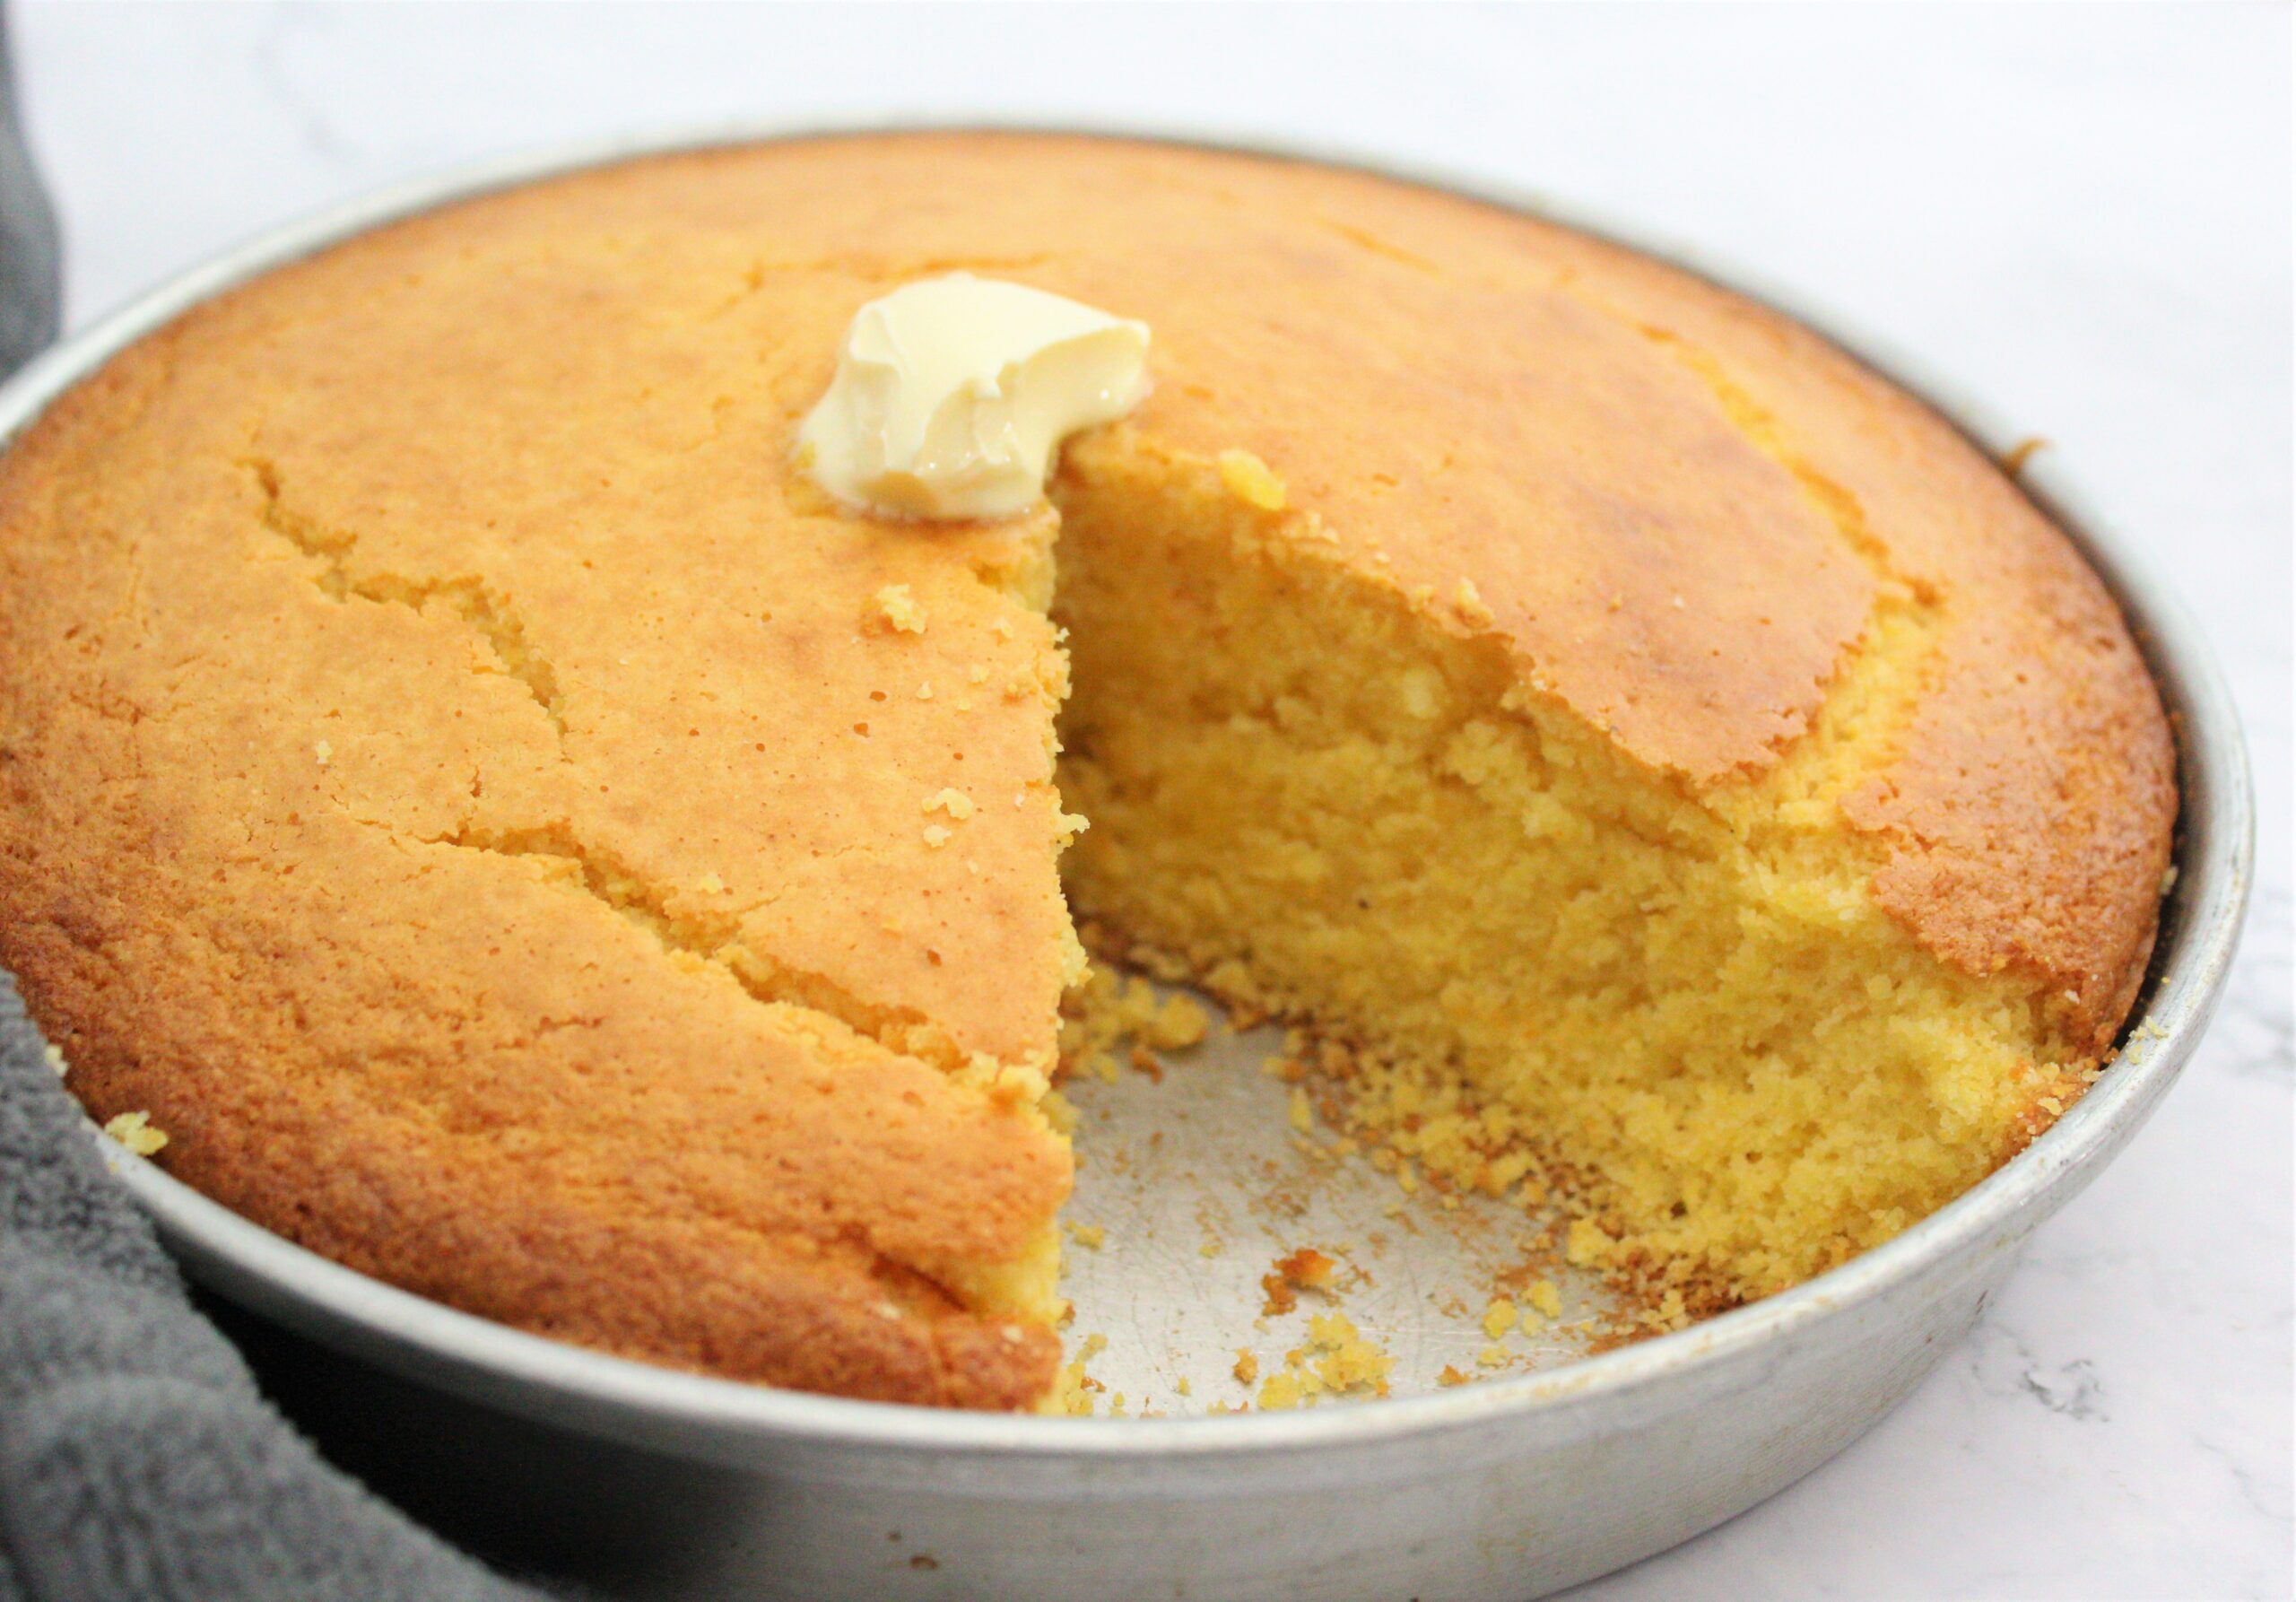 How many calories are in an average slice of cornbread?